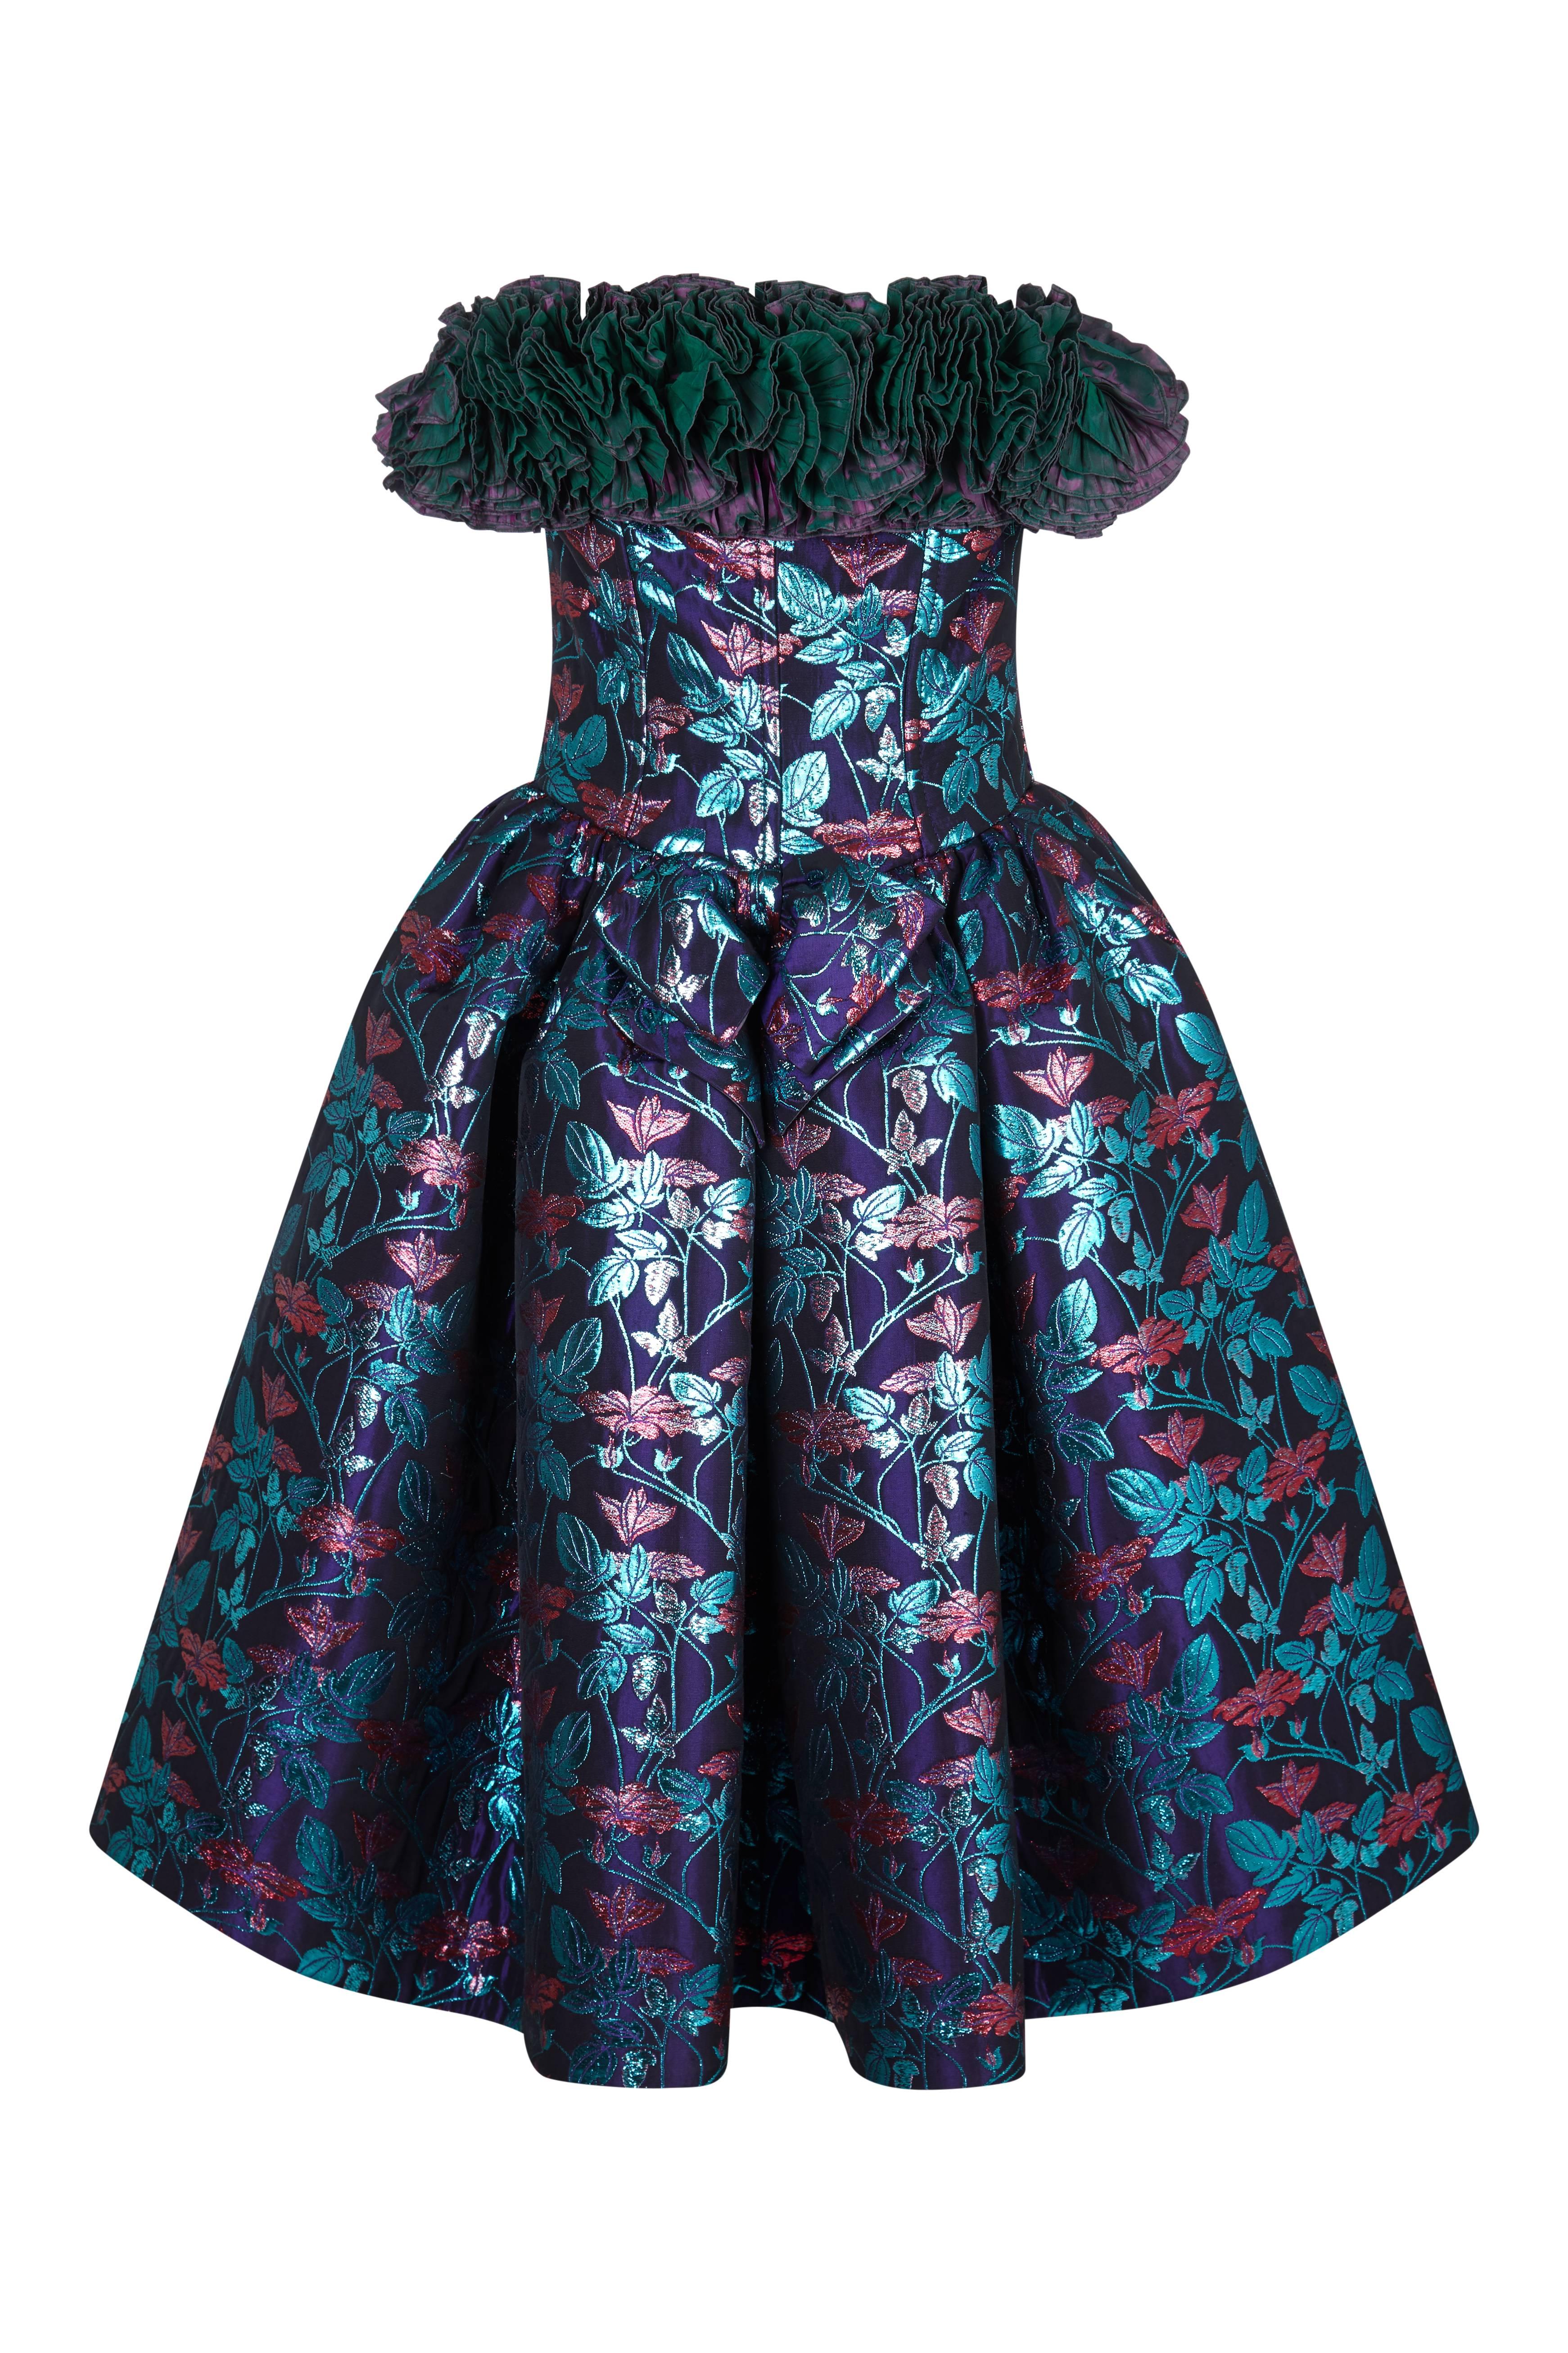 This incredible 1990s Nina Ricci haute couture party dress is a guaranteed show-stopper and boasts a striking array of design features synonymous with the uncompromising feminine glamour of this celebrated label. Lavish, deep purple lame fabric is